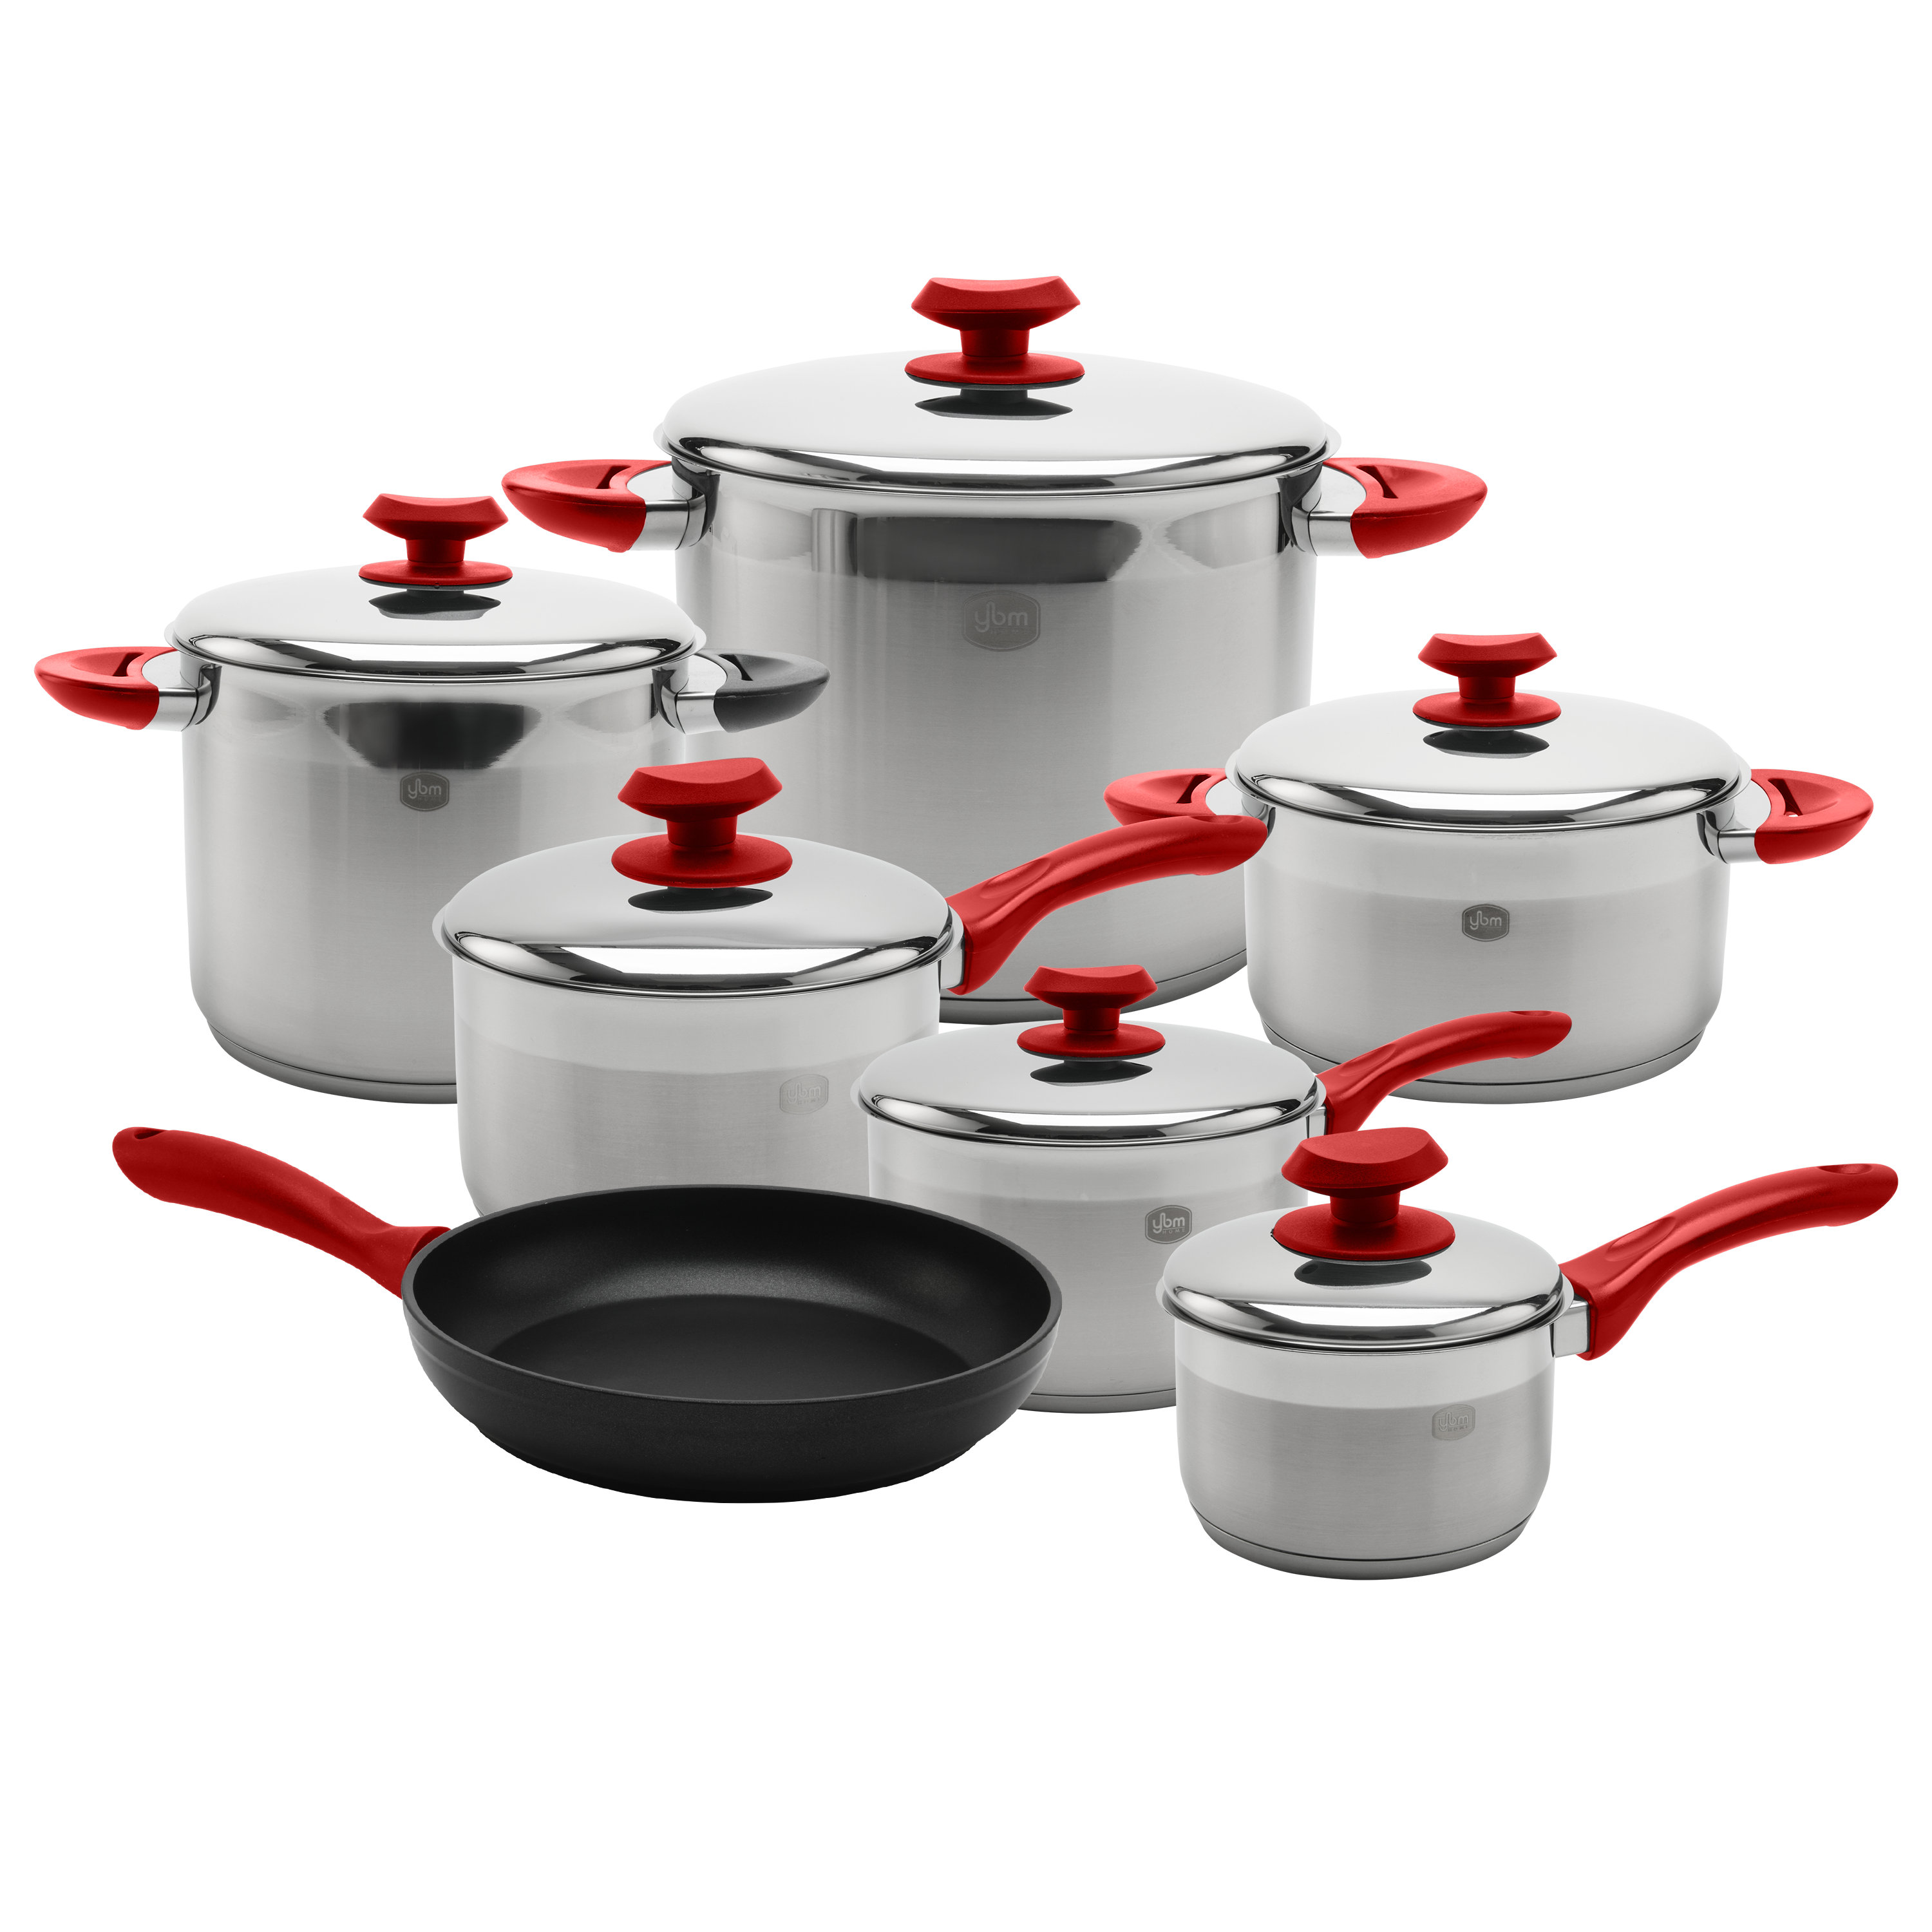 Nutrichef Triply Cookware Set - Steel - 8 requests